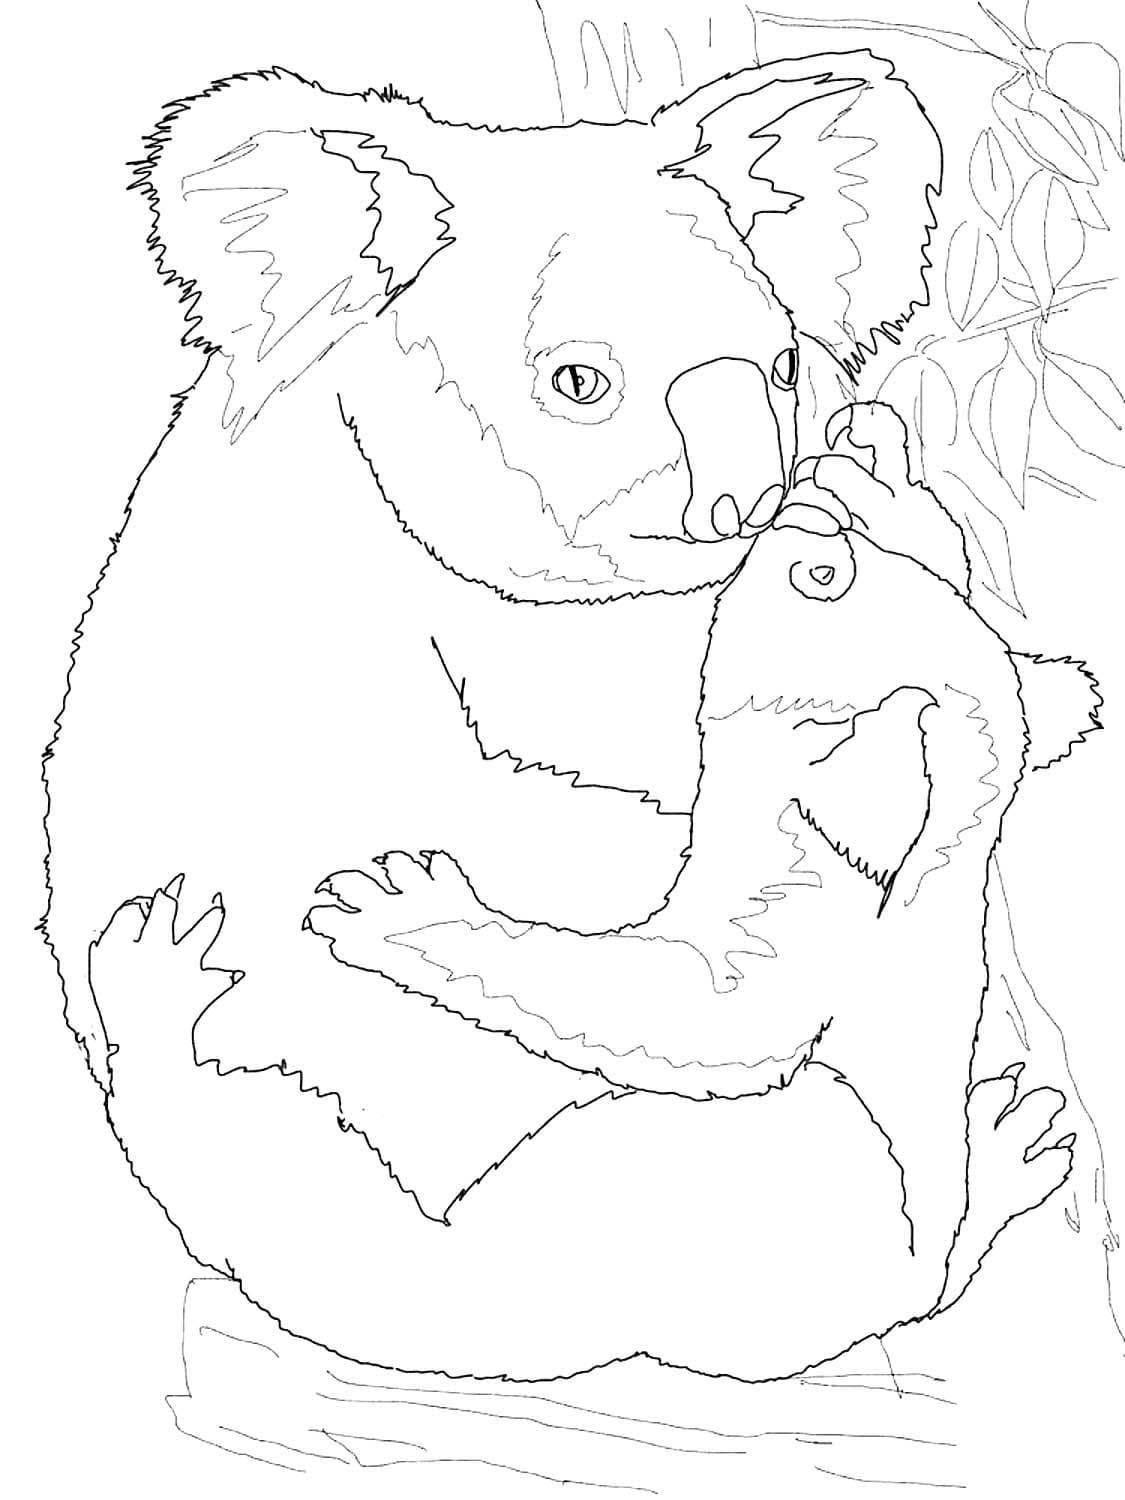 Koala Coloring Pages | 100 Pictures Free Printable